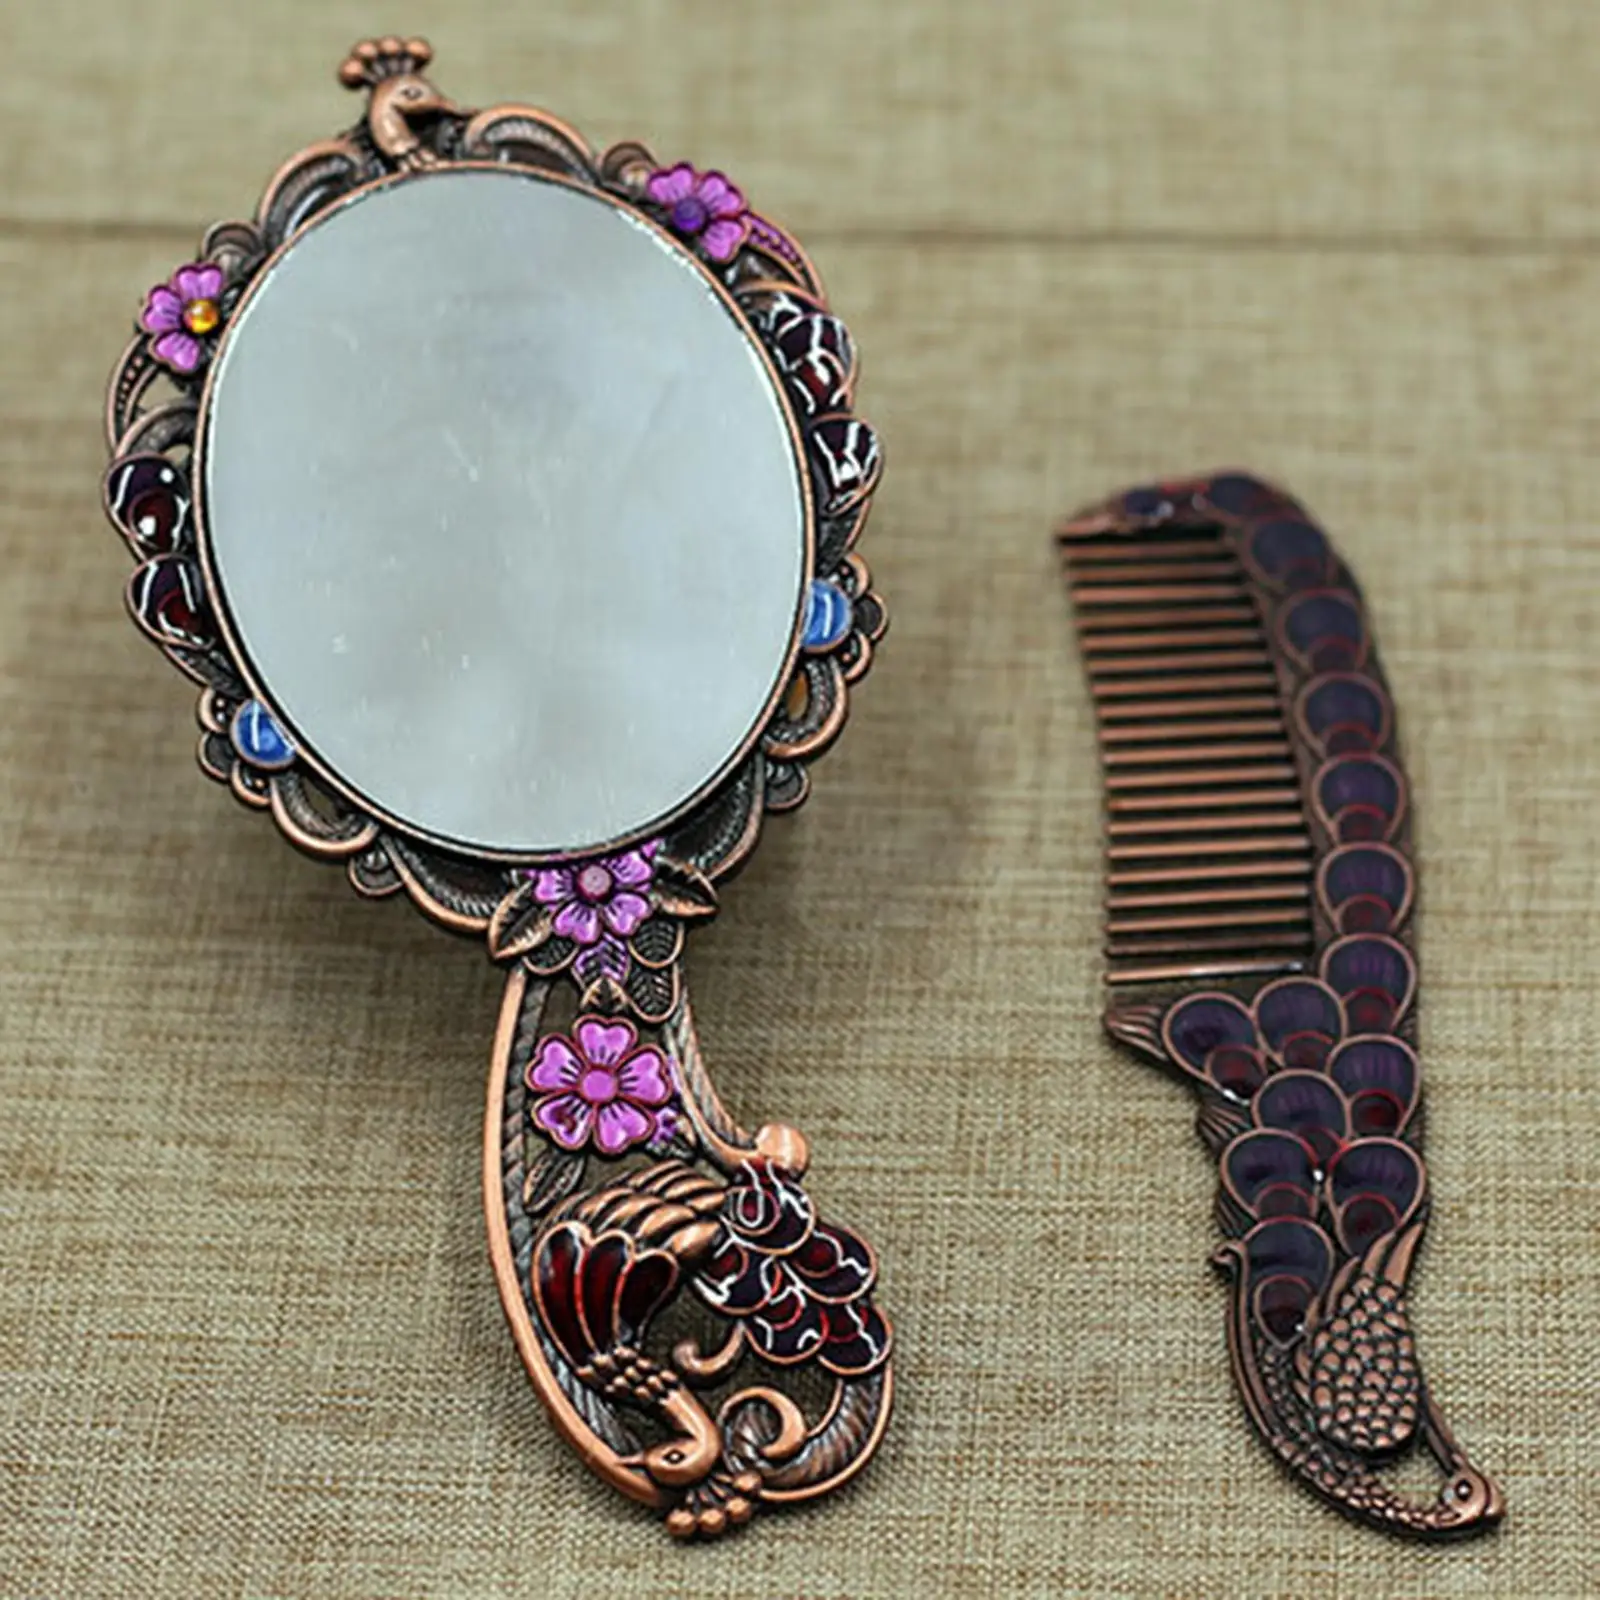 Embossing Oval Peacock Mirror Comb Set Travel Girl Gift Durable for Women Salon Decorative